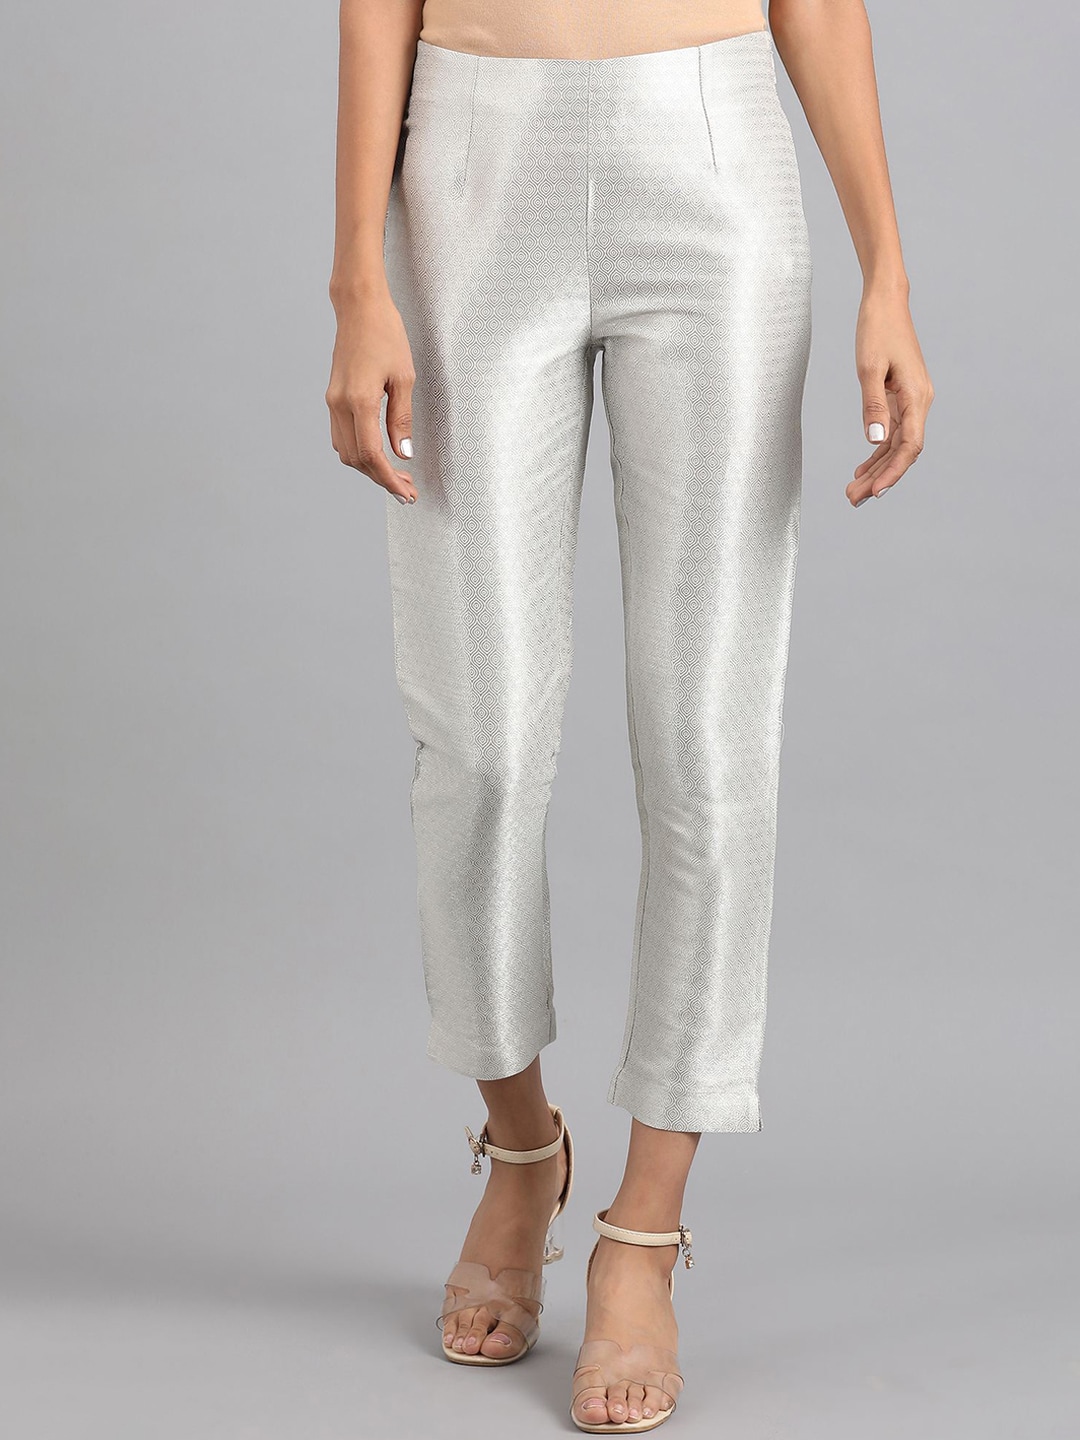 W Women Silver-Toned Printed Slim Fit Cropped Trousers Price in India